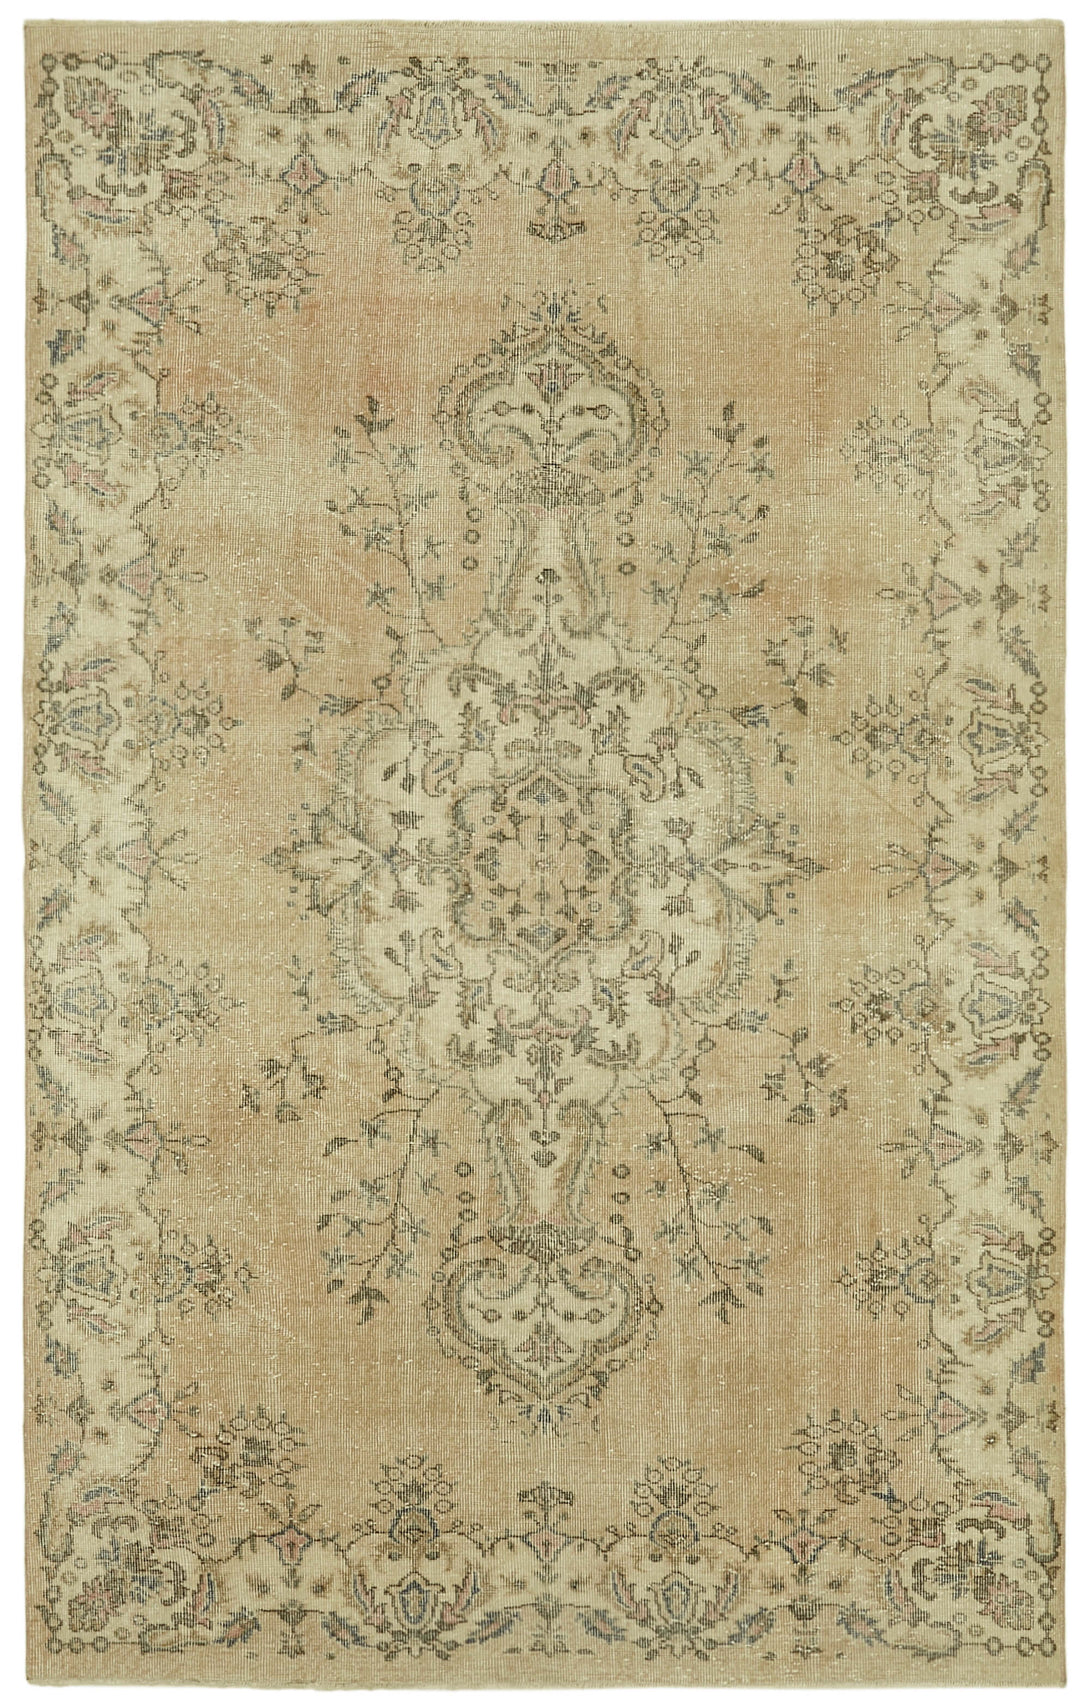 Handmade White Wash Area Rug > Design# OL-AC-41640 > Size: 6'-2" x 9'-10", Carpet Culture Rugs, Handmade Rugs, NYC Rugs, New Rugs, Shop Rugs, Rug Store, Outlet Rugs, SoHo Rugs, Rugs in USA